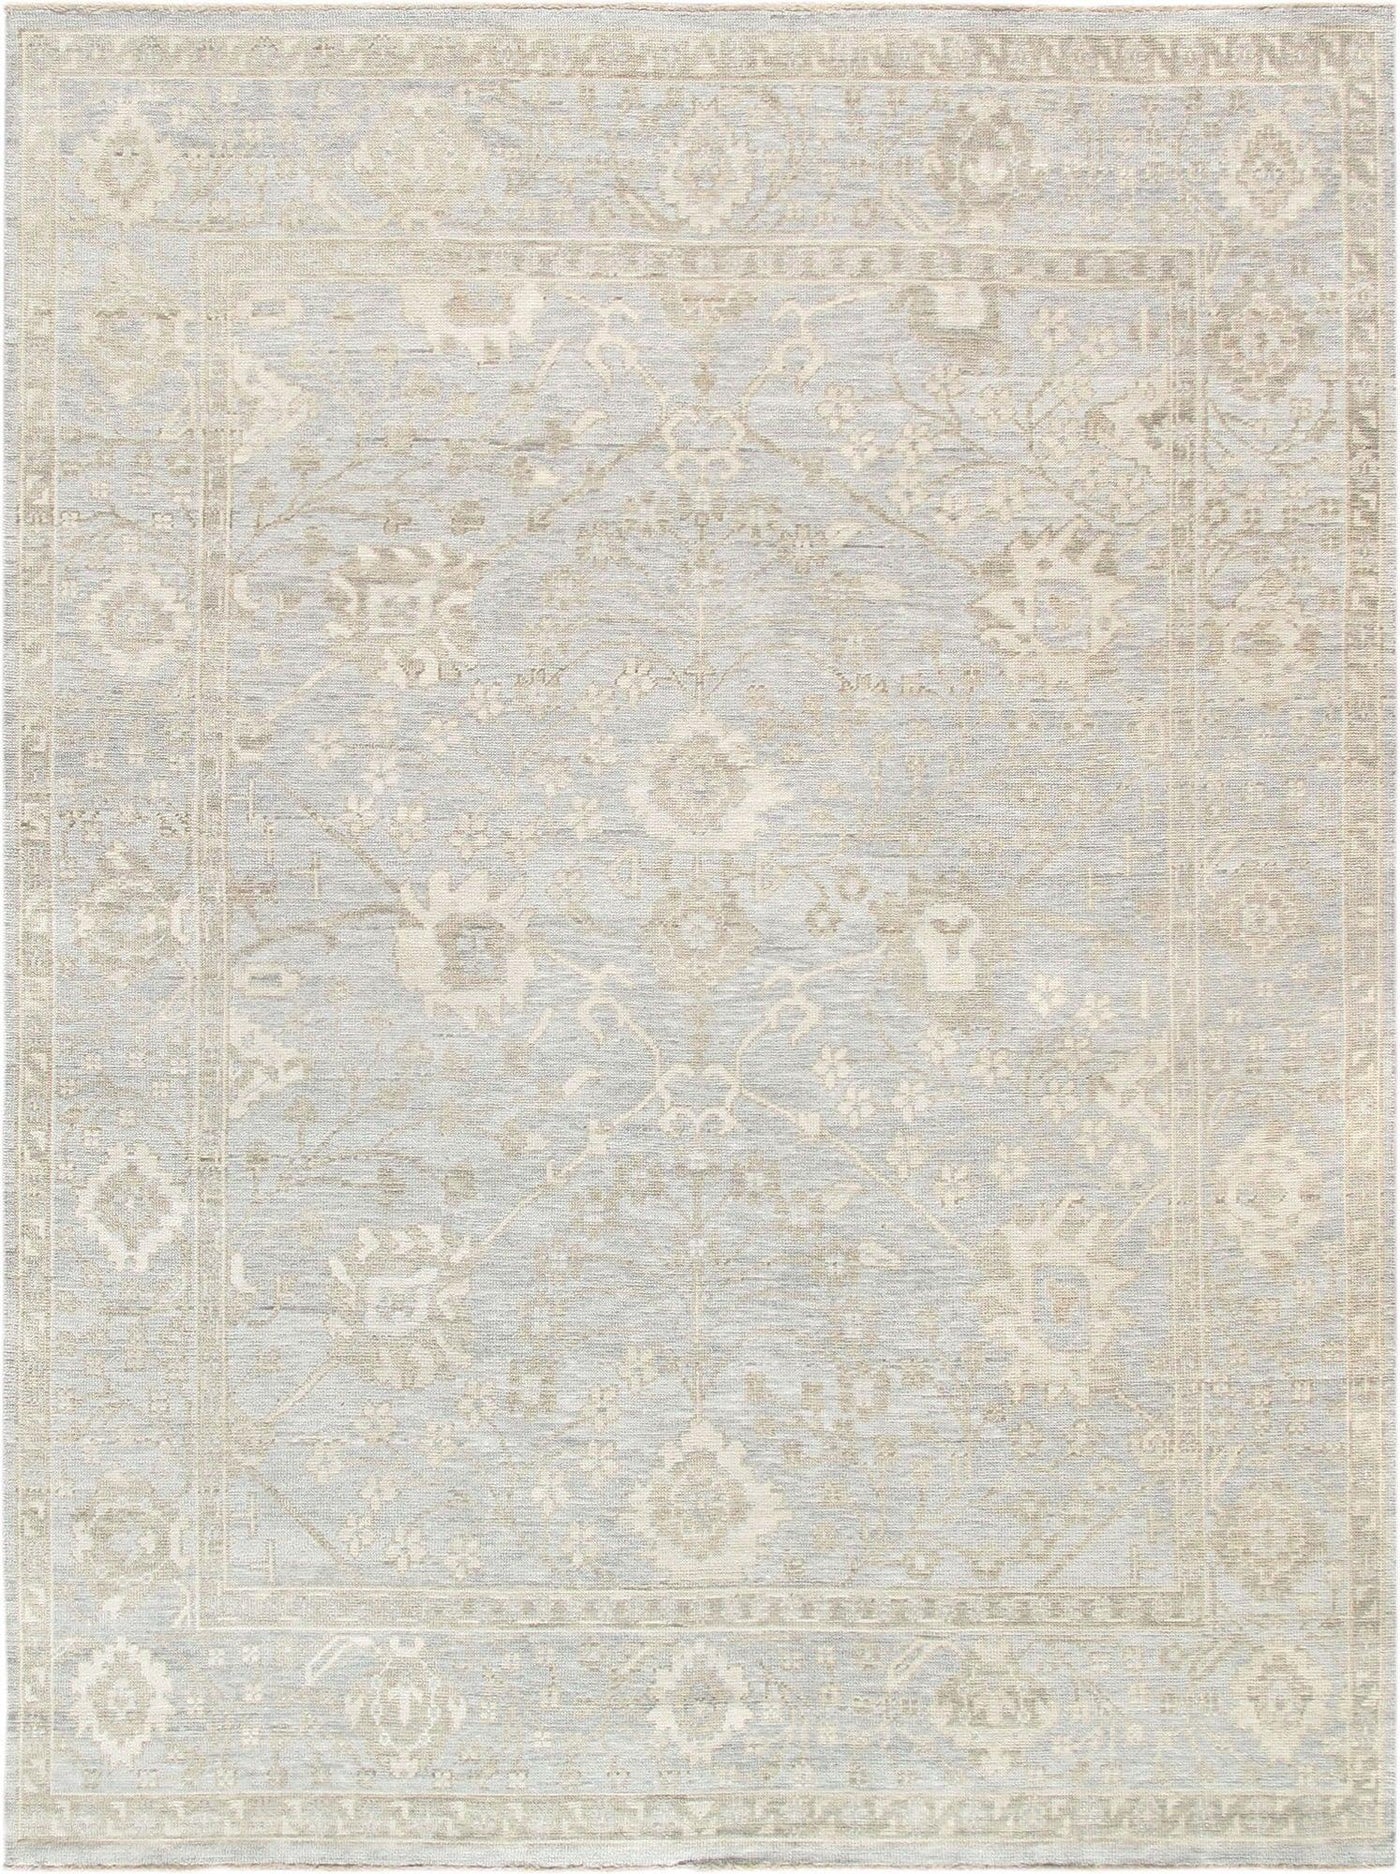 Canvello Oushak Hand-Knotted Light Blue Wool Area Rug - 11'11" X 15' 2"